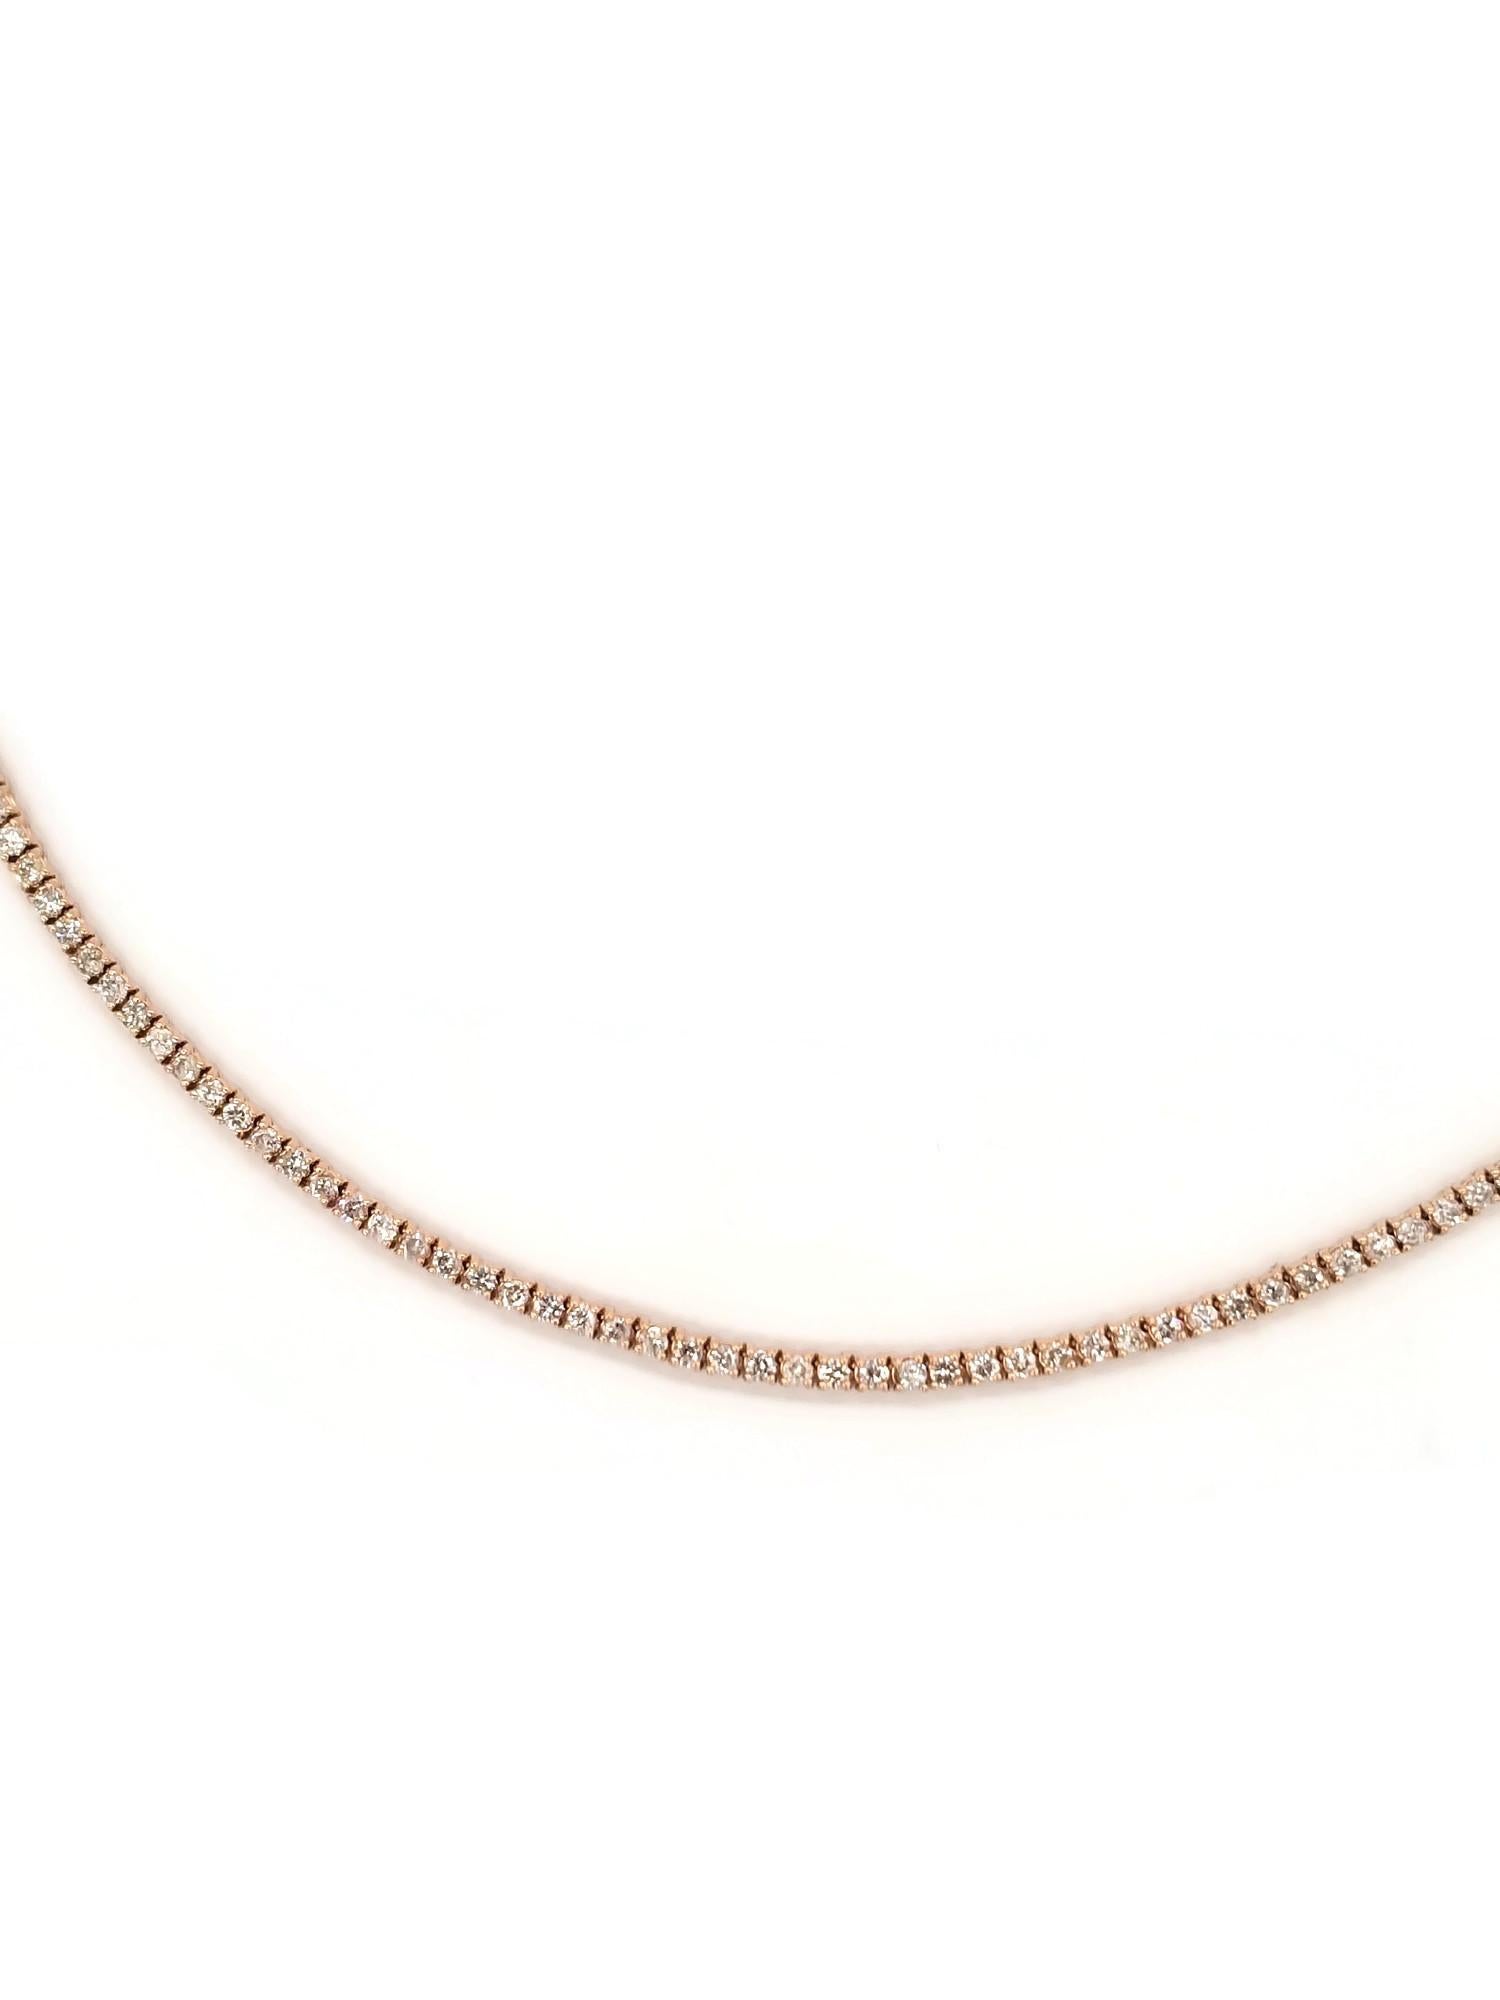 Brilliant and beautiful tennis necklace, natural round-brilliant cut white diamonds clean and Excellent shine. 14k rose gold classic four-prong style for maximum light brilliance. 14 inch length. average I Color, SI Clarity. Elegance for every